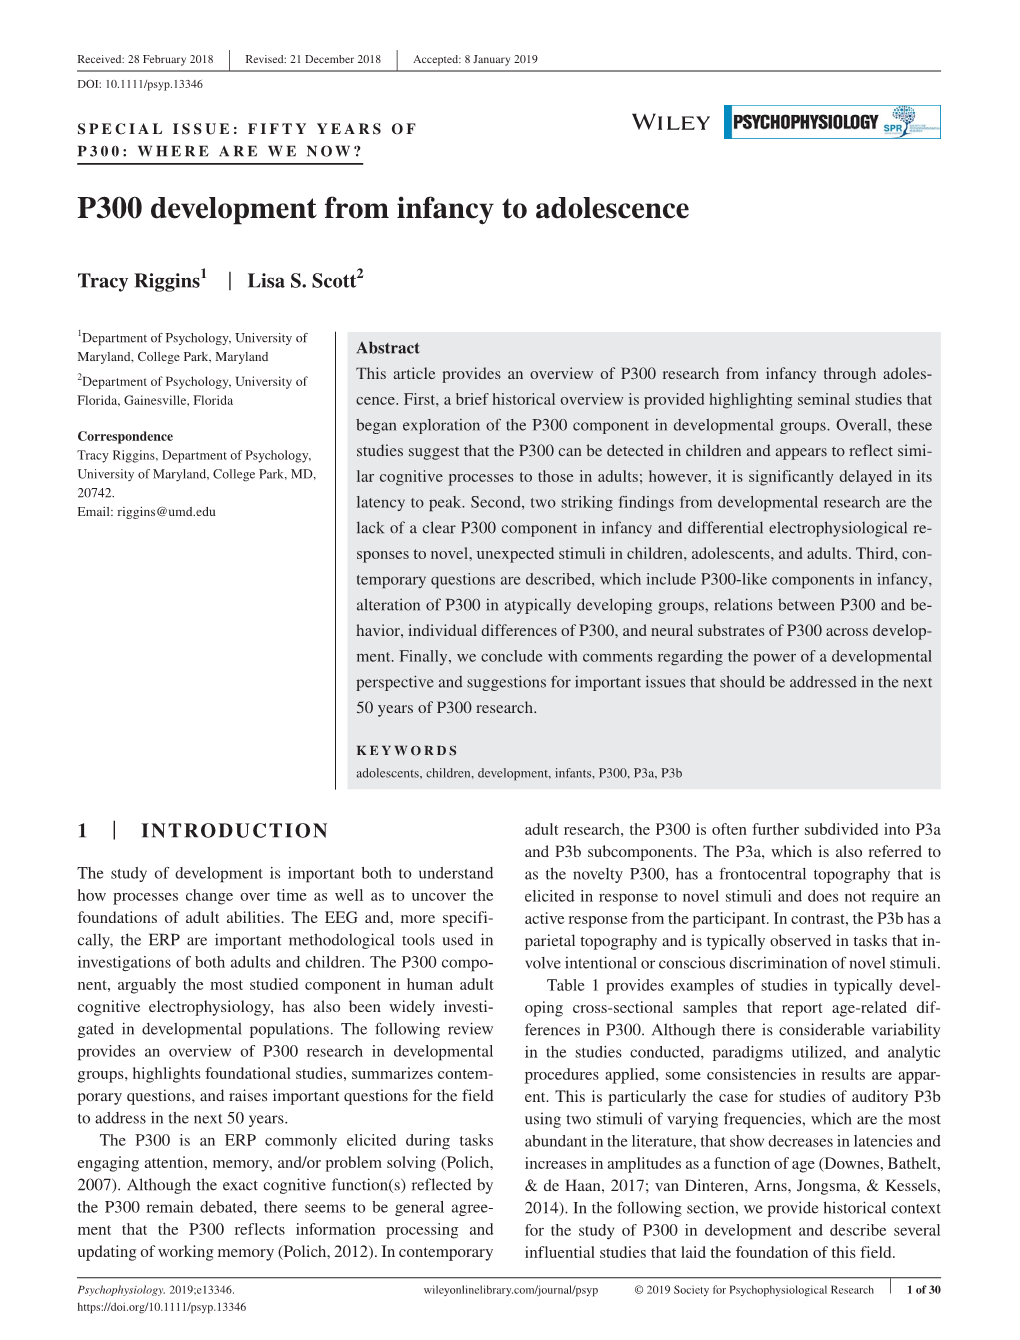 P300 Development from Infancy to Adolescence